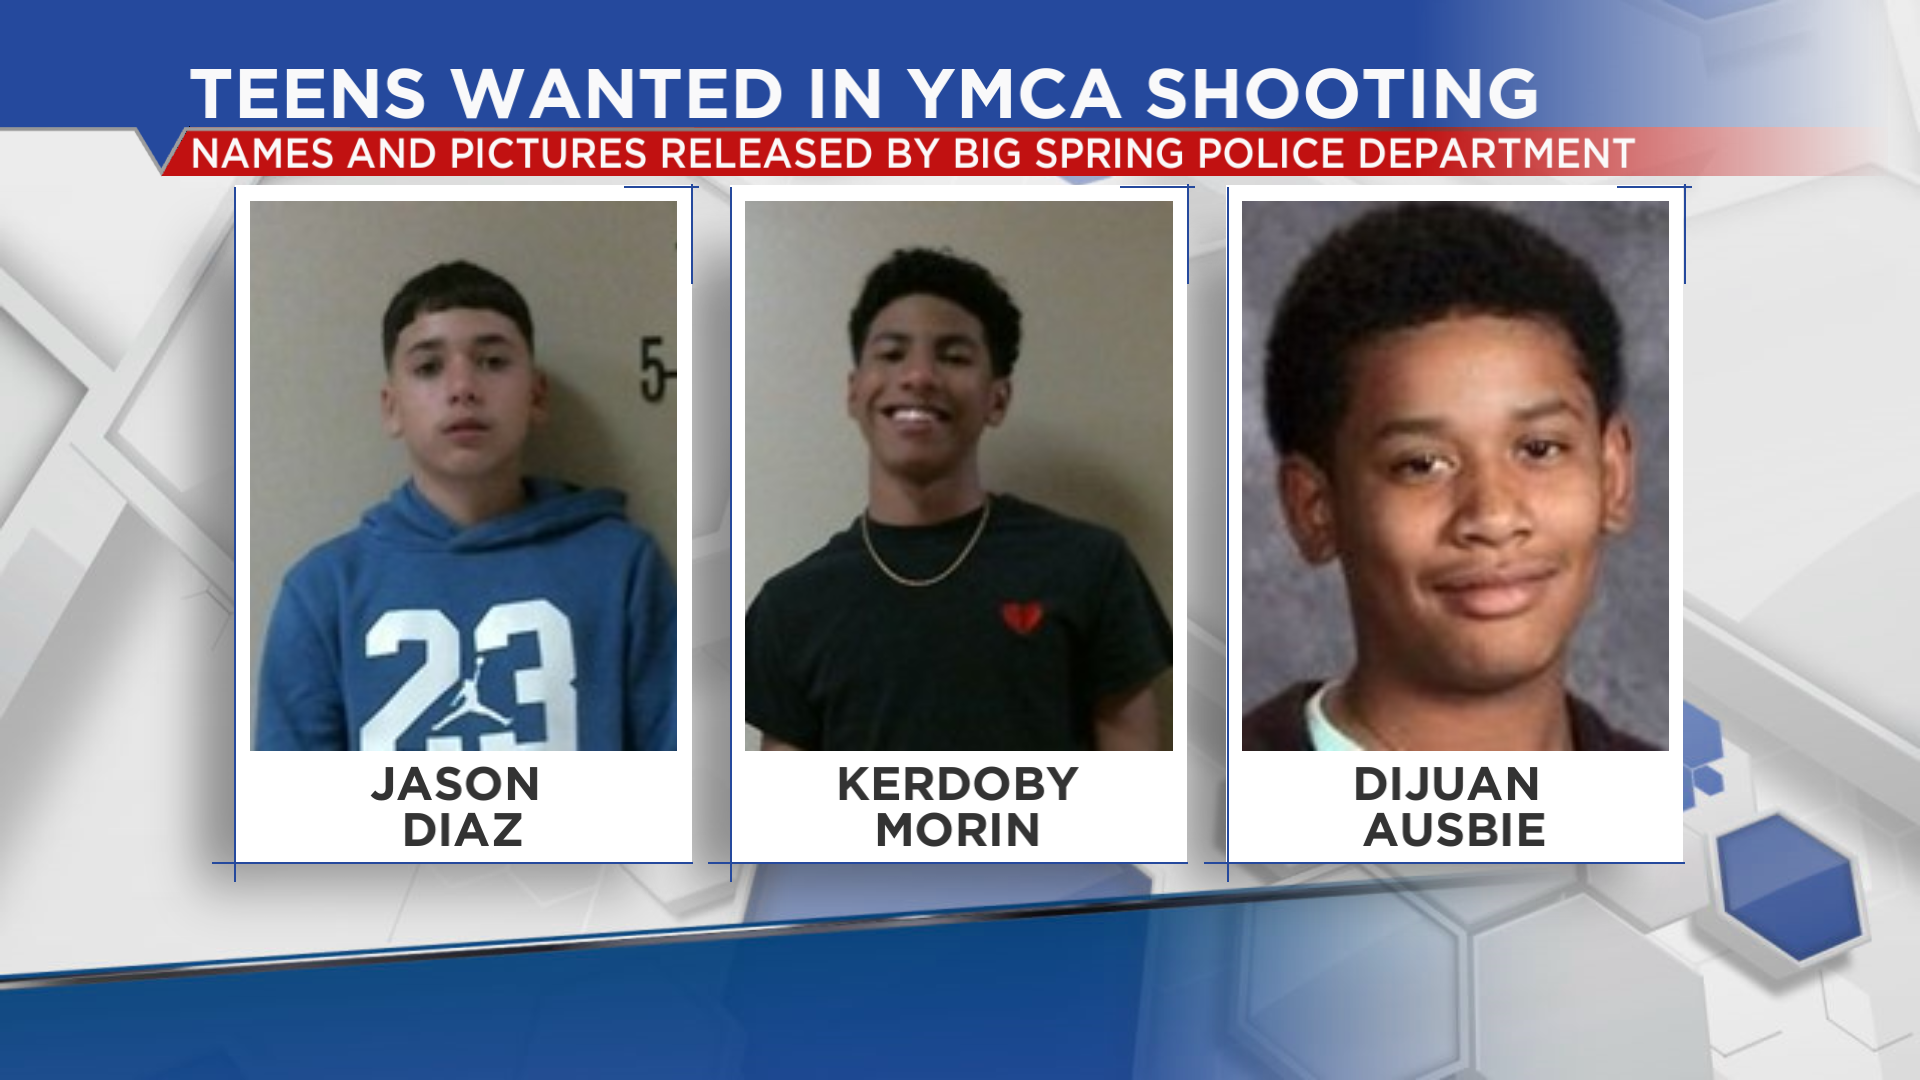 Big Spring YMCA shooting police searching for teens involved